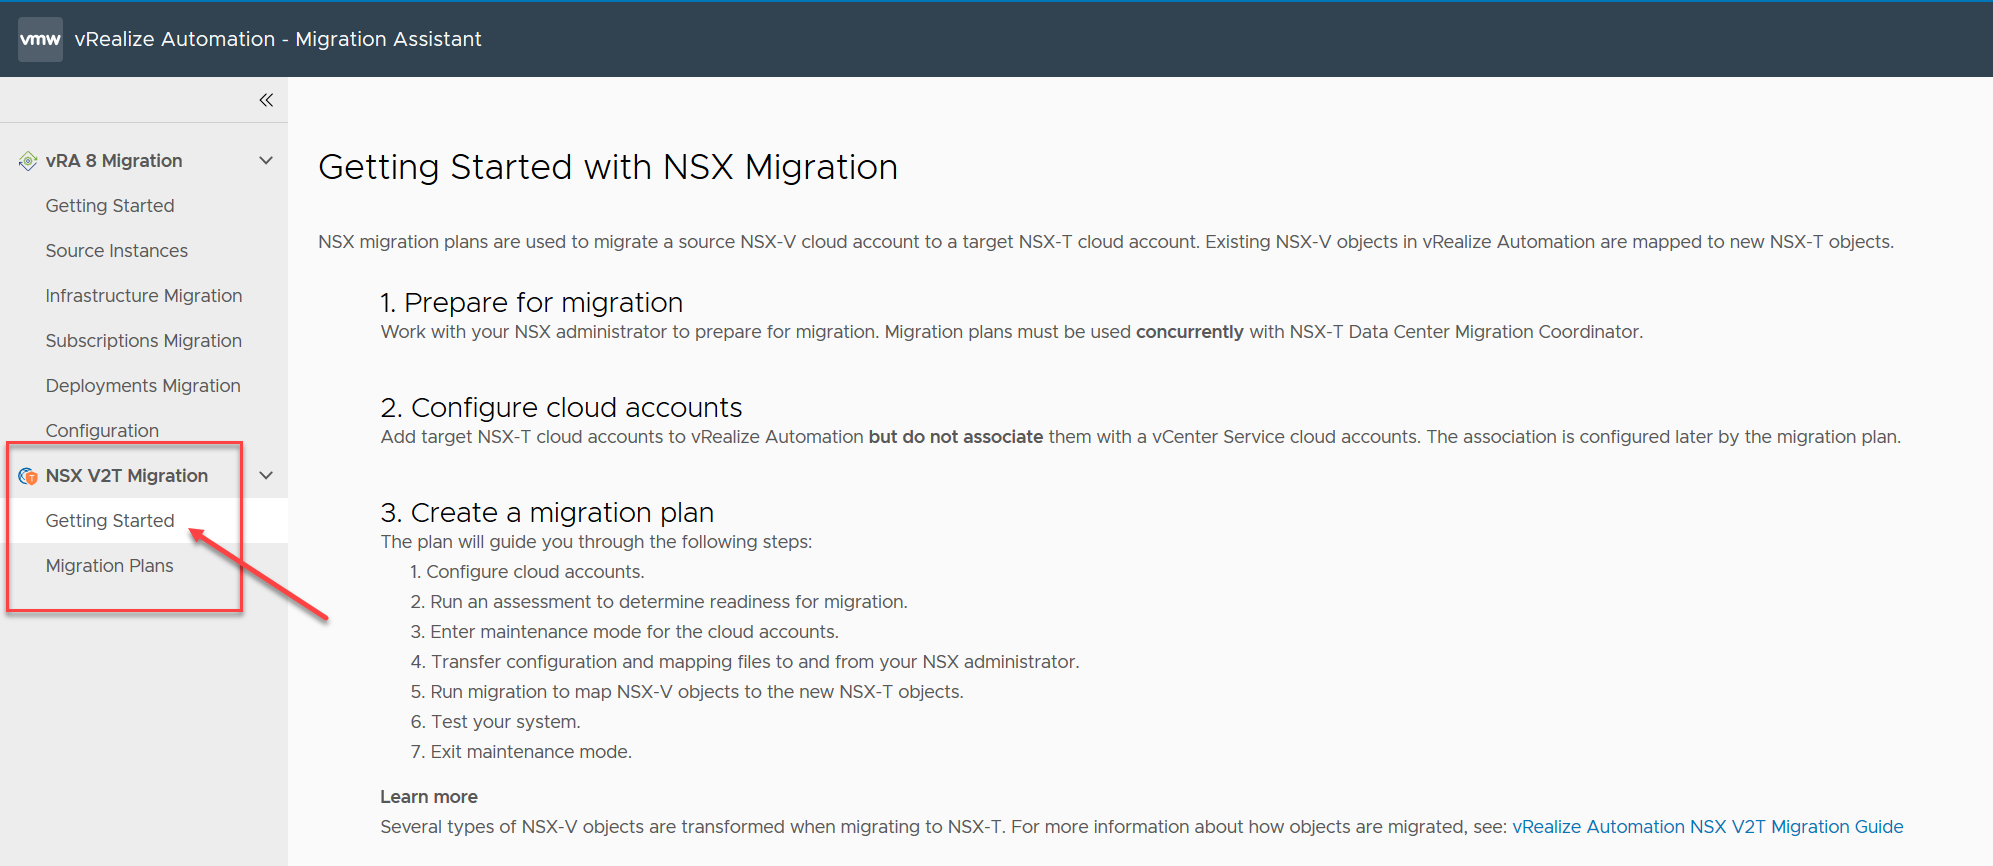 A screenshot of vRealize Automation landing page with Services tab and the vRA Migration Assistant tile highlighted.